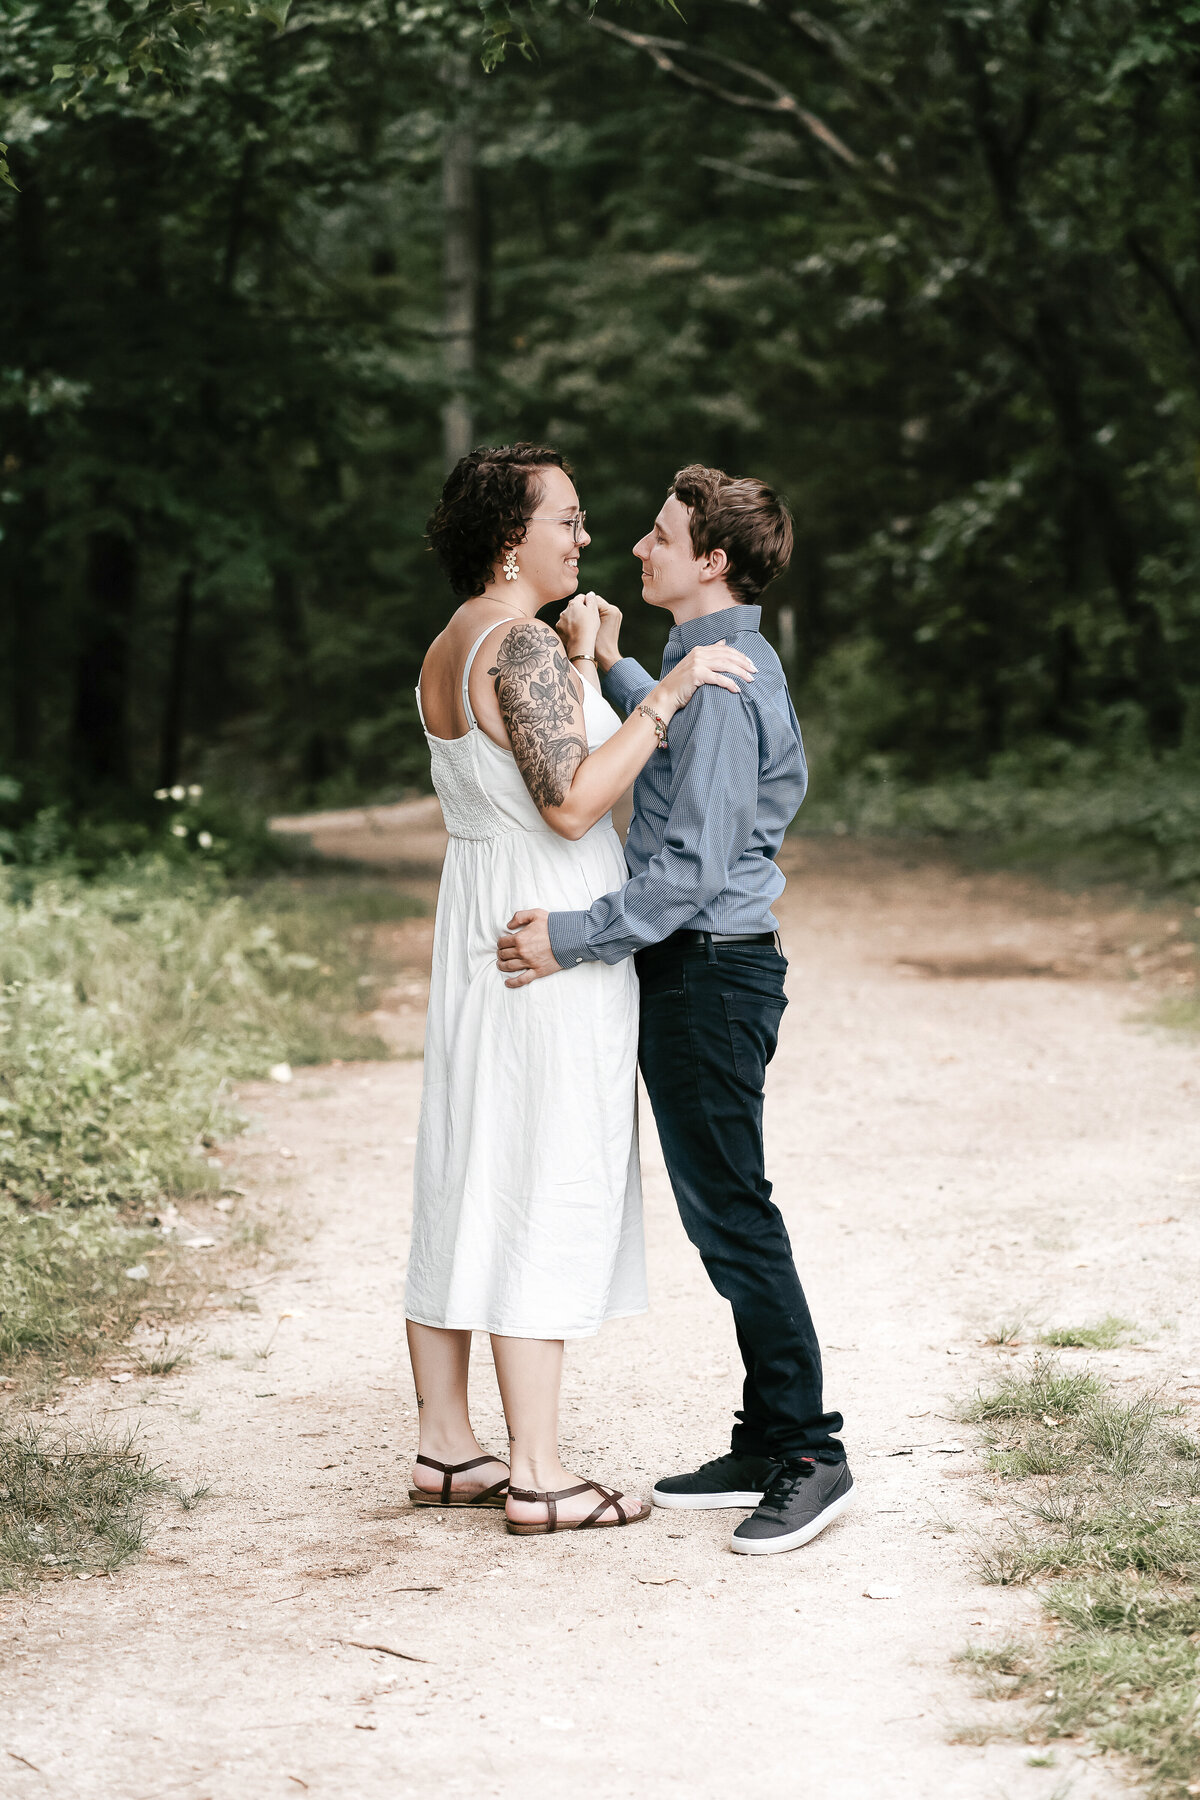 Timeless Love: A beautiful moment captured in engagement photos by Danielle Littles Photography, showcasing the genuine connection and joy between the enchanting couple.